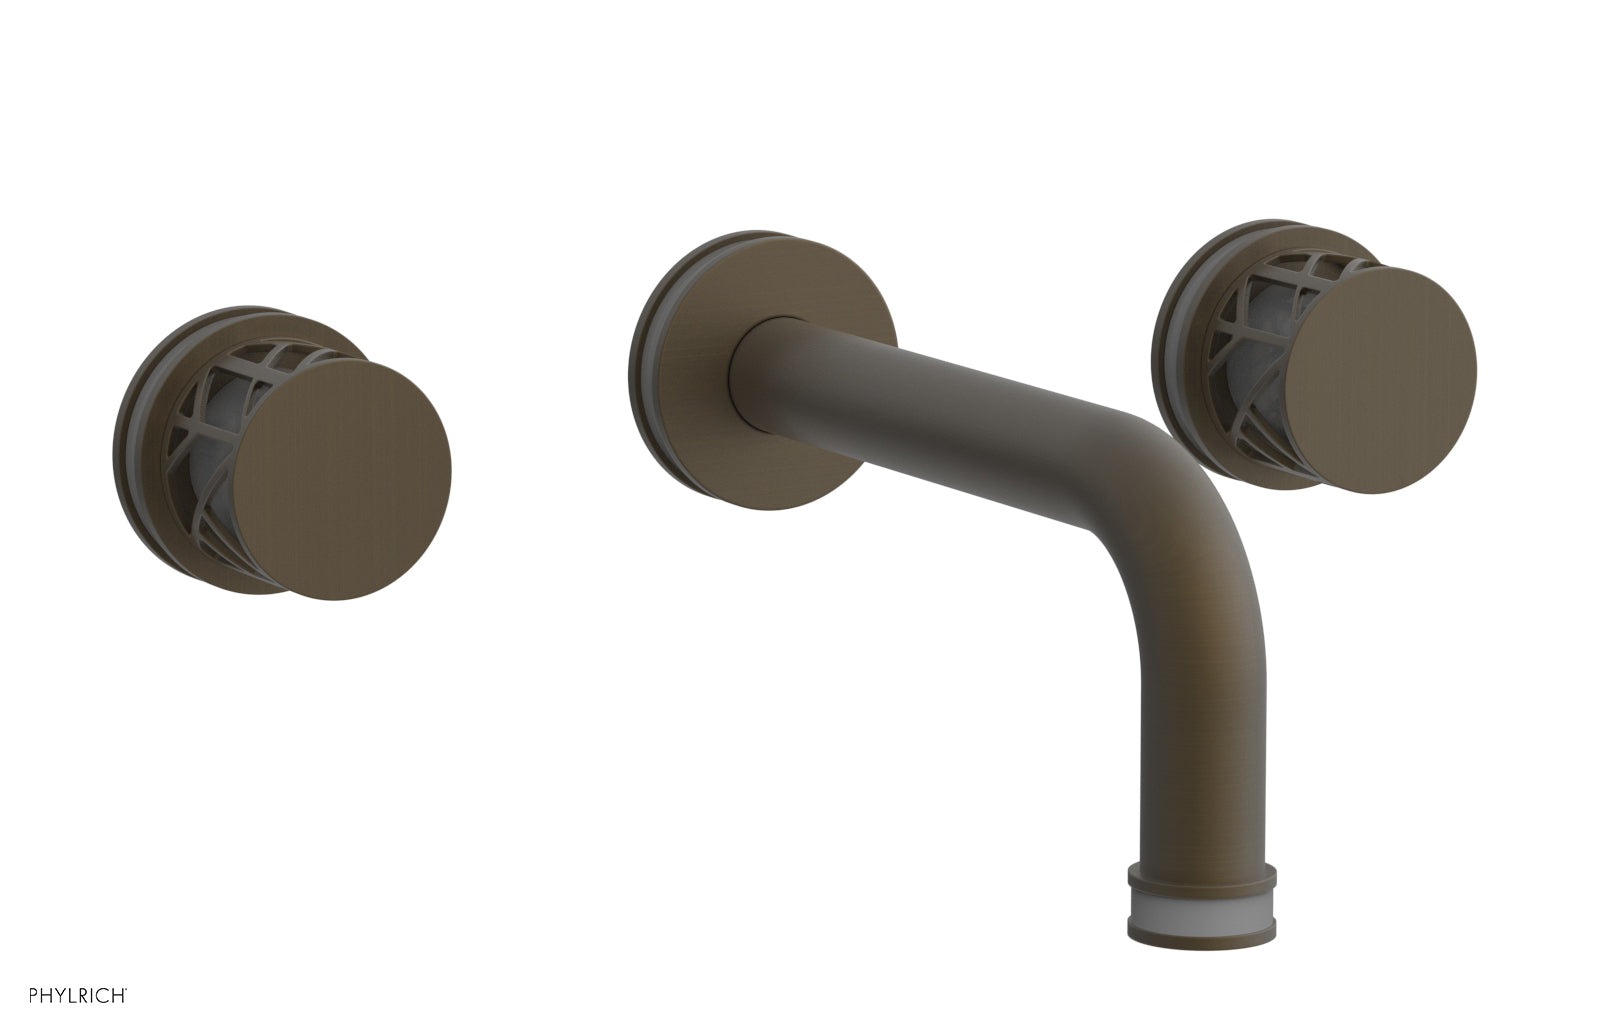 Phylrich JOLIE Wall Lavatory Set - Round Handles with "Grey" Accents